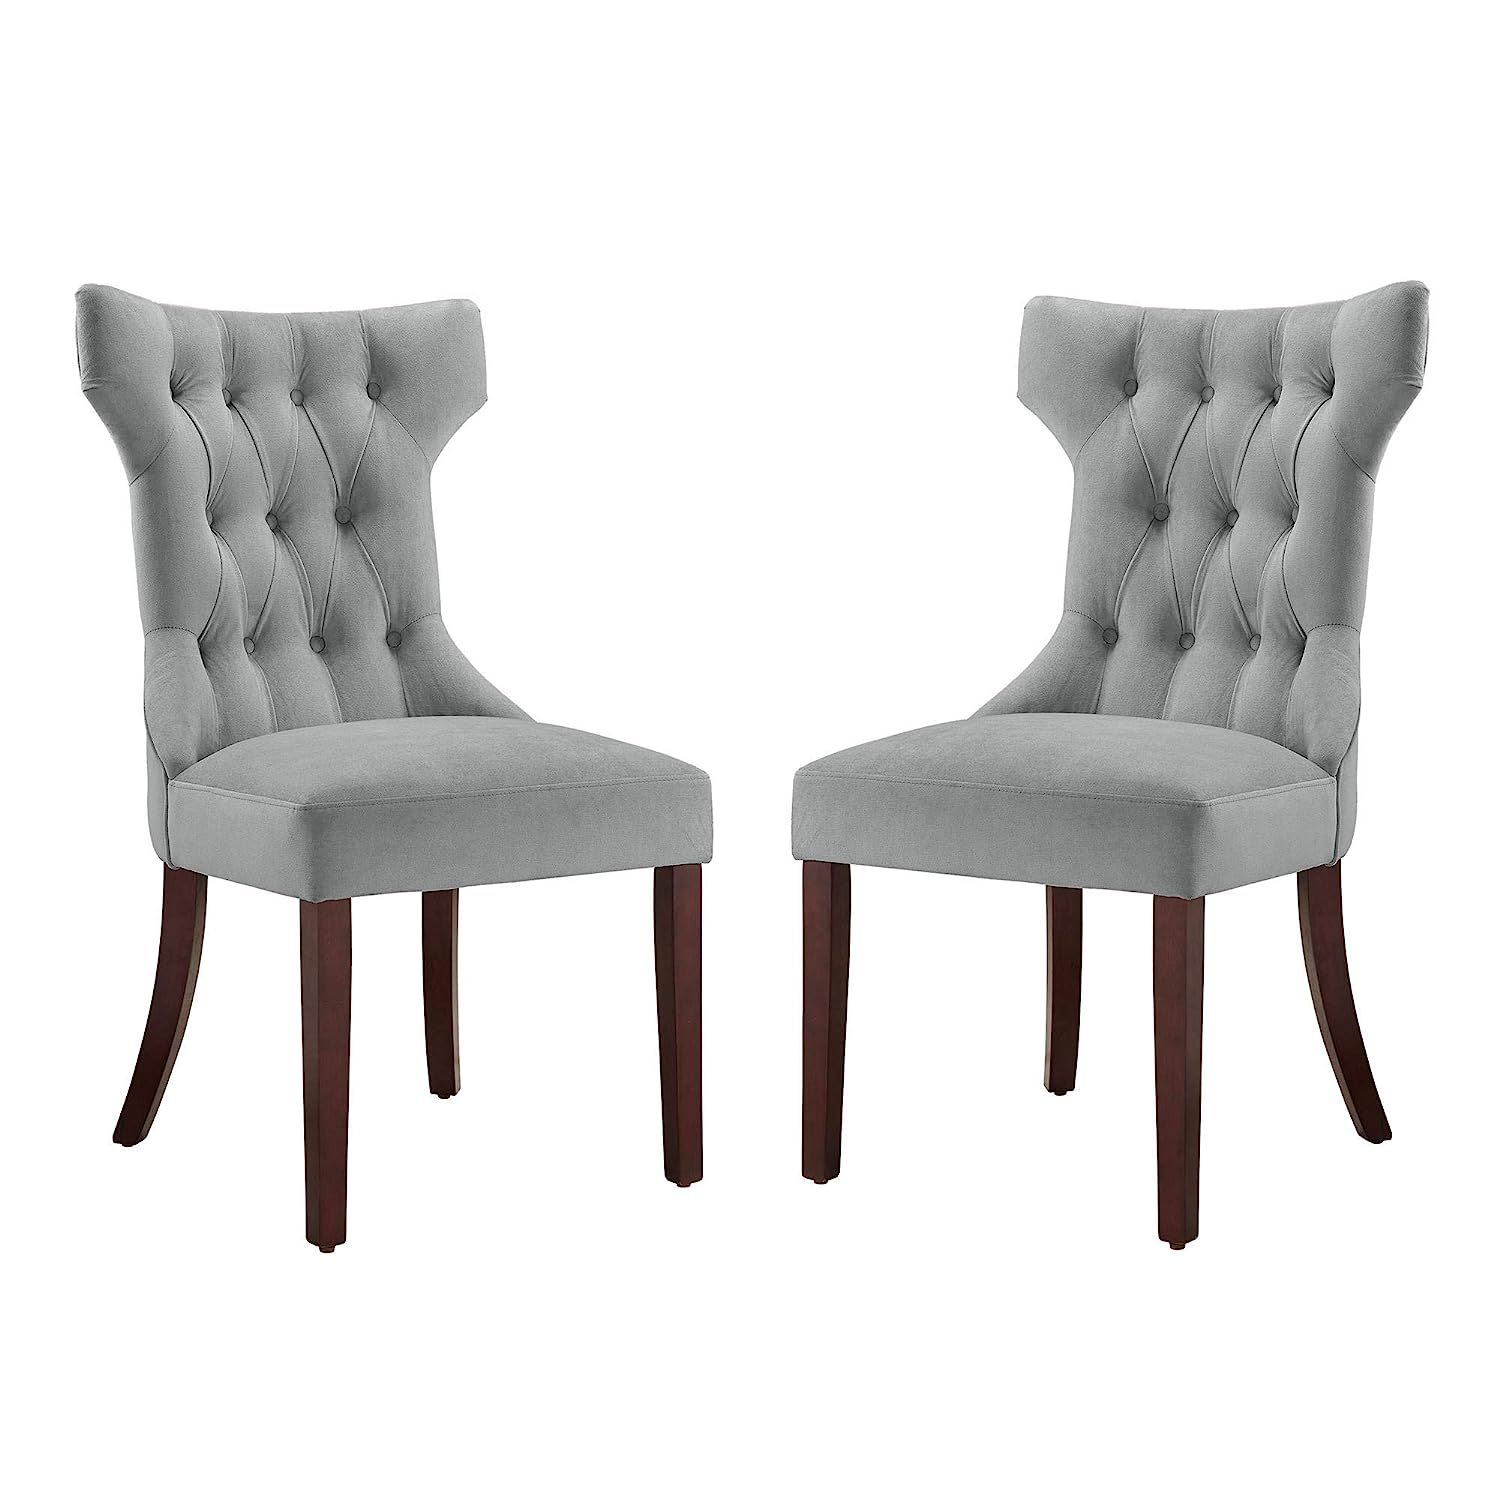 Dorel Living DA6090-PL Clairborne Upholstered dining chair, set of 2, Gray | Amazon (US)